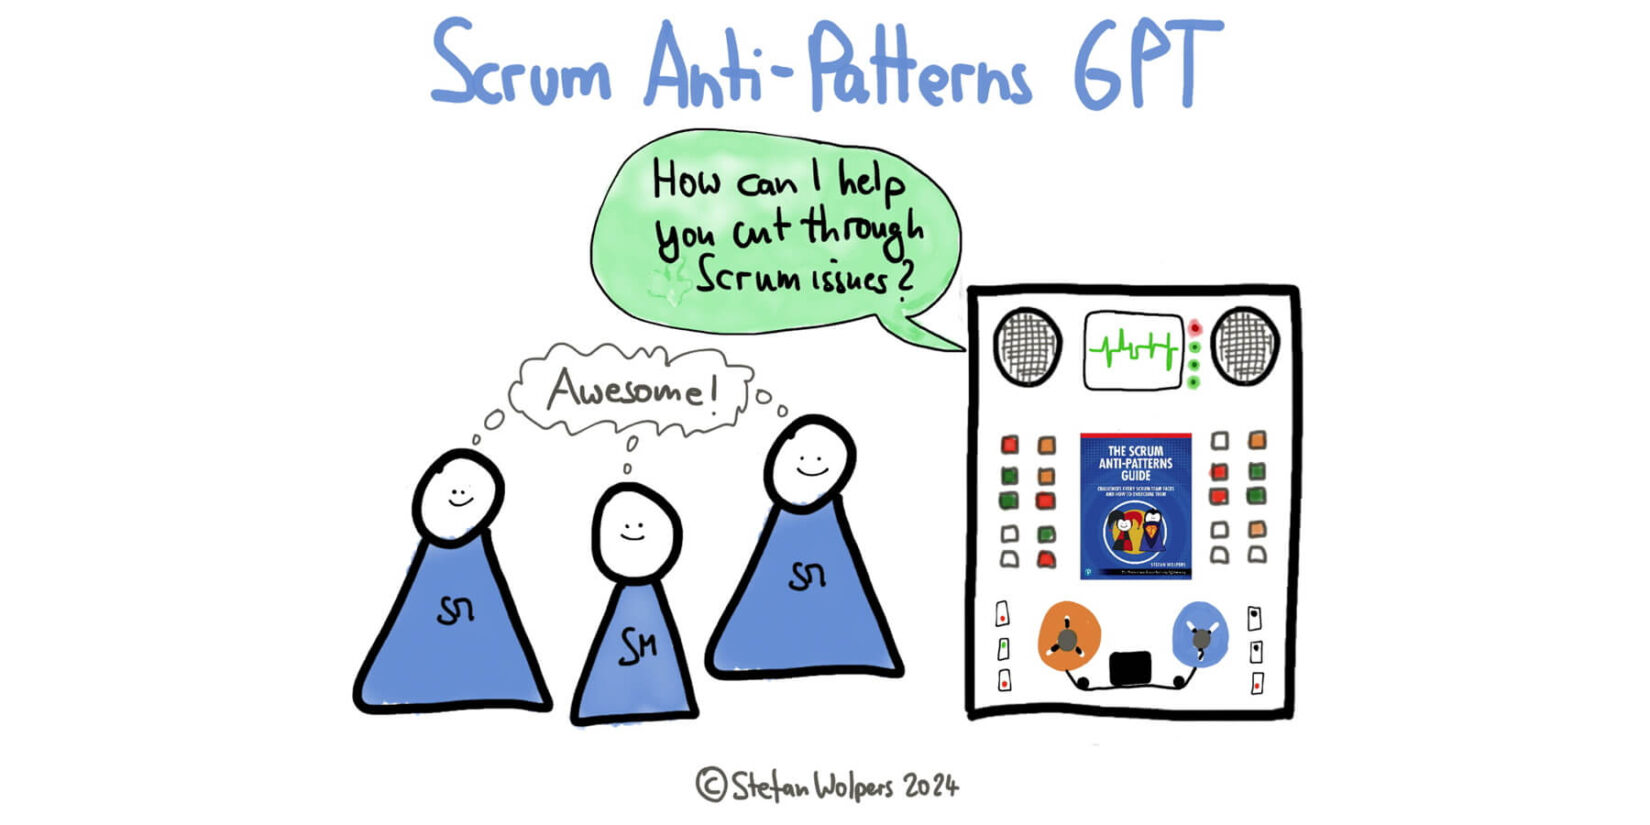 Scrum Anti-Patterns GPT — Useful or a Gaming Exercise? — Age-of-Product.com